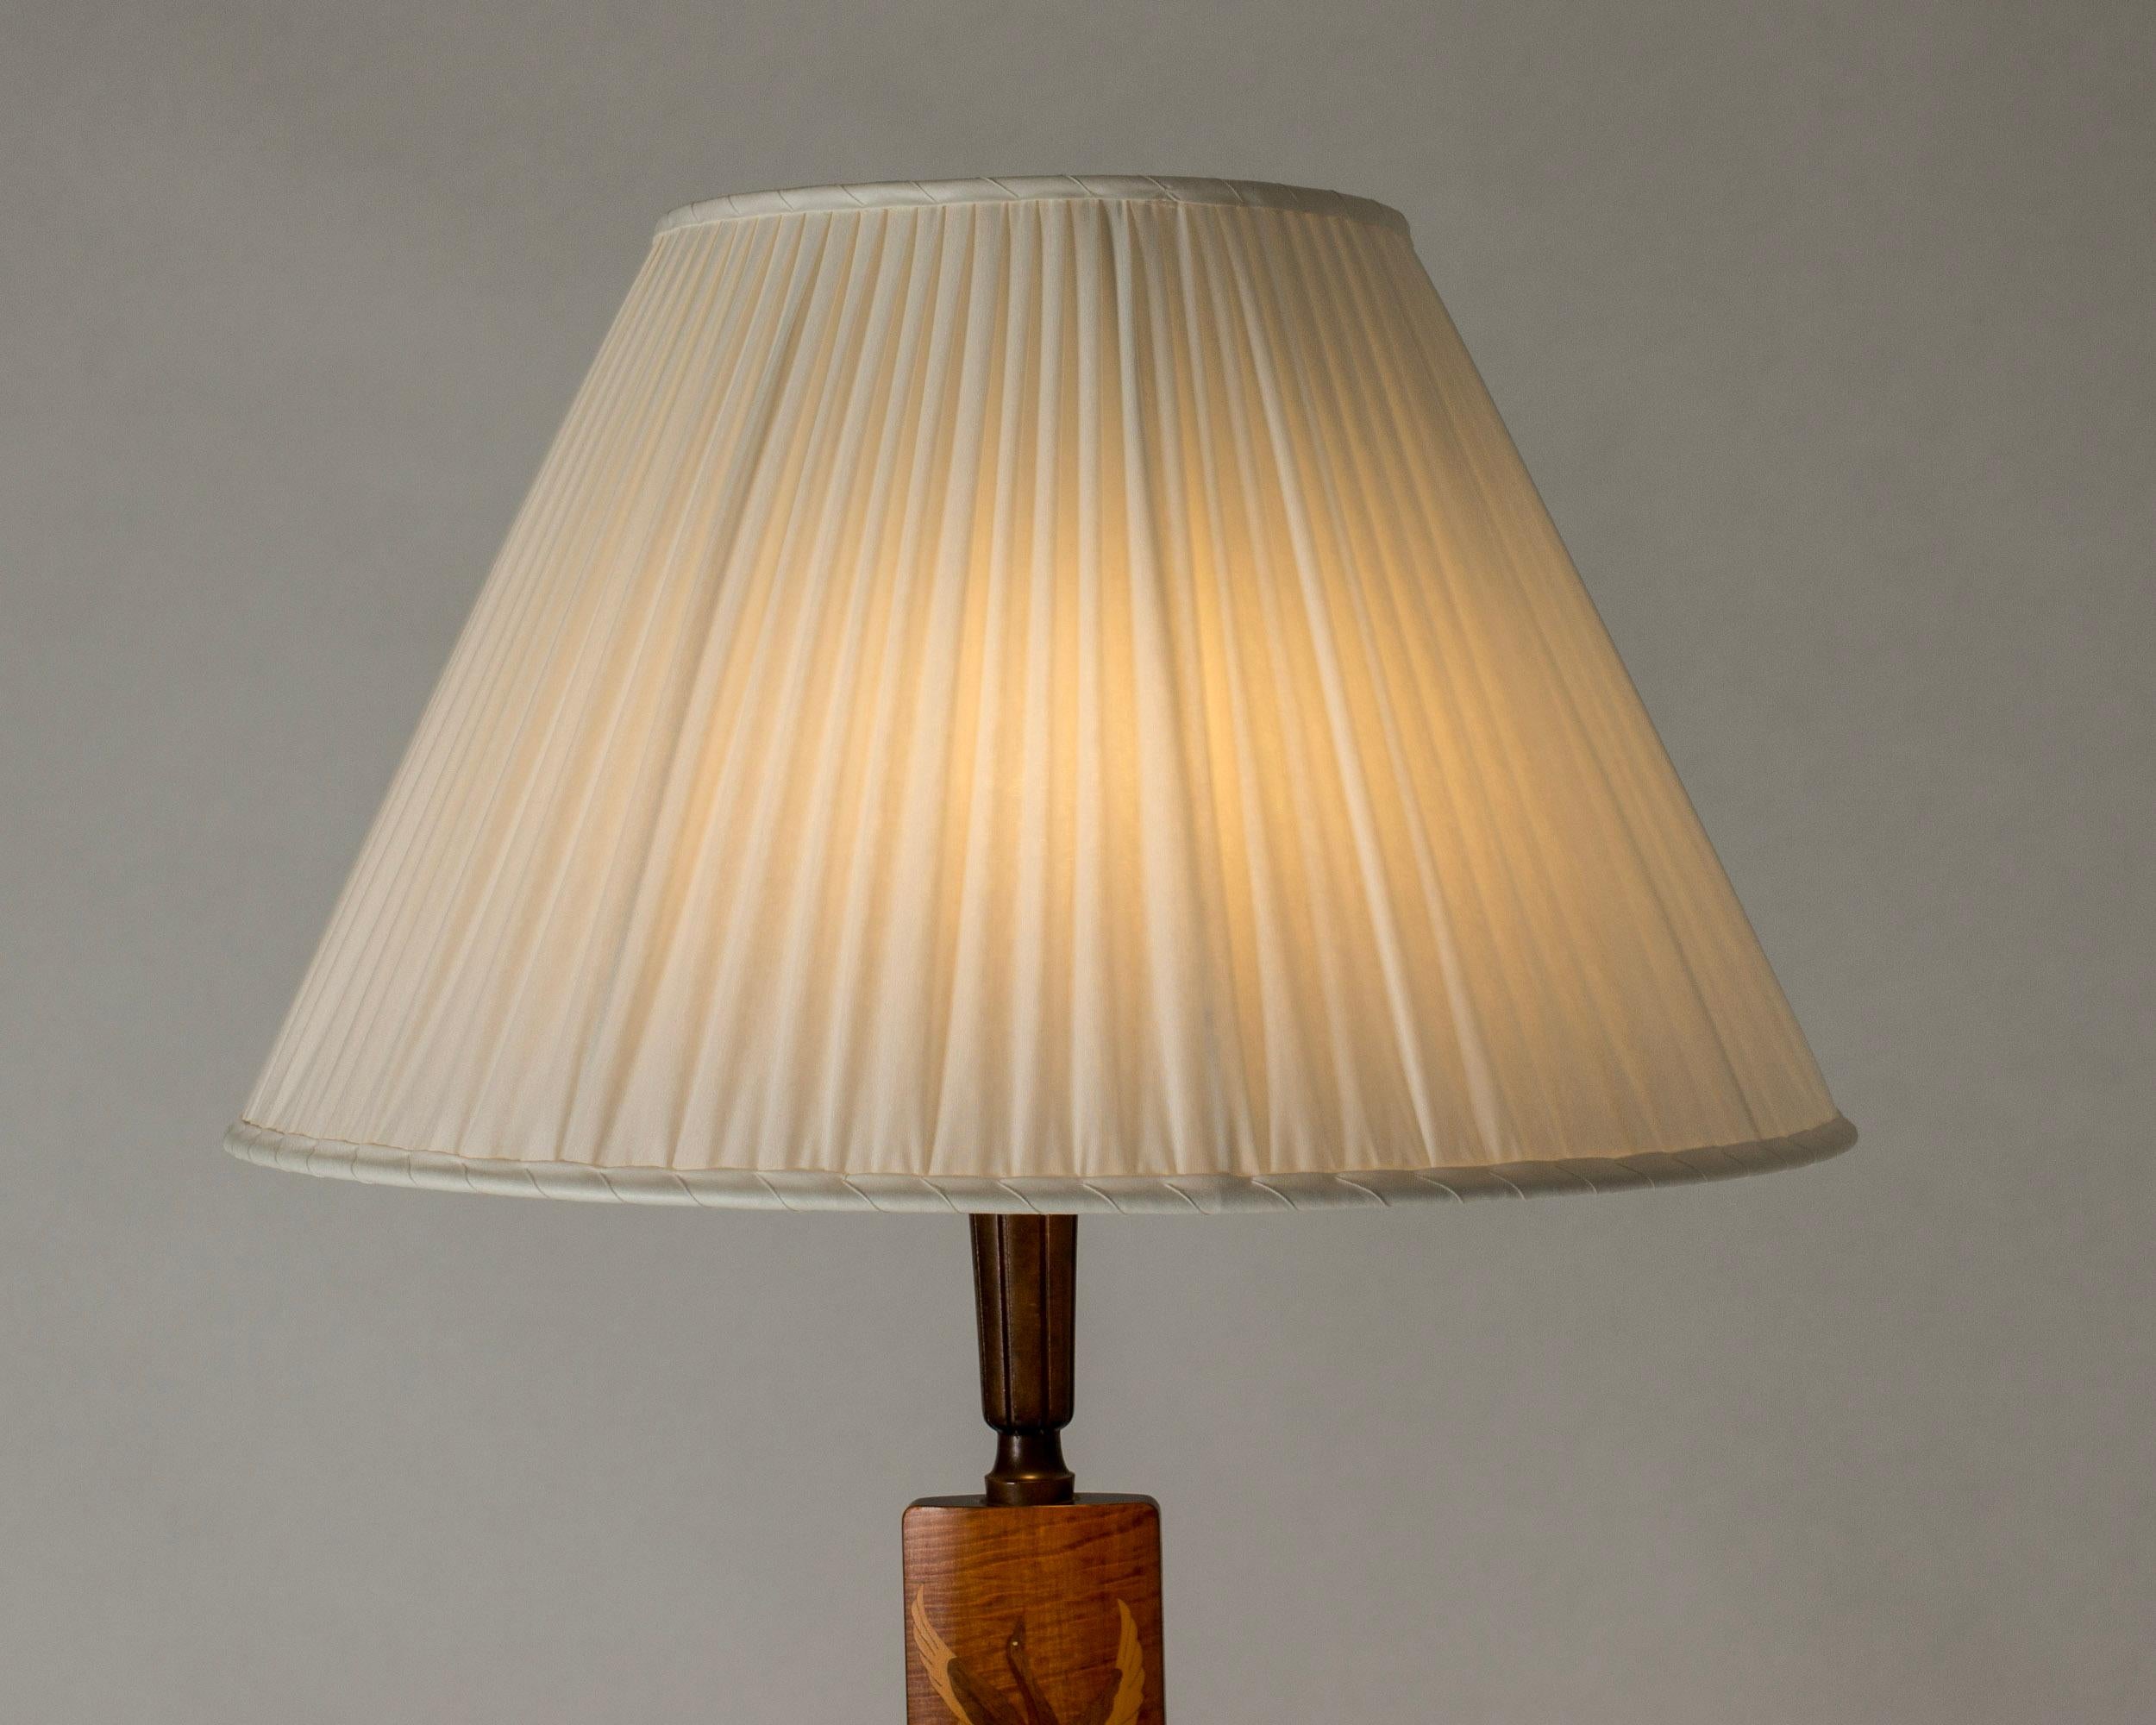 Swedish Modern floor lamp with inlays, Mjölby Intarsia, Sweden, 1930s For Sale 5